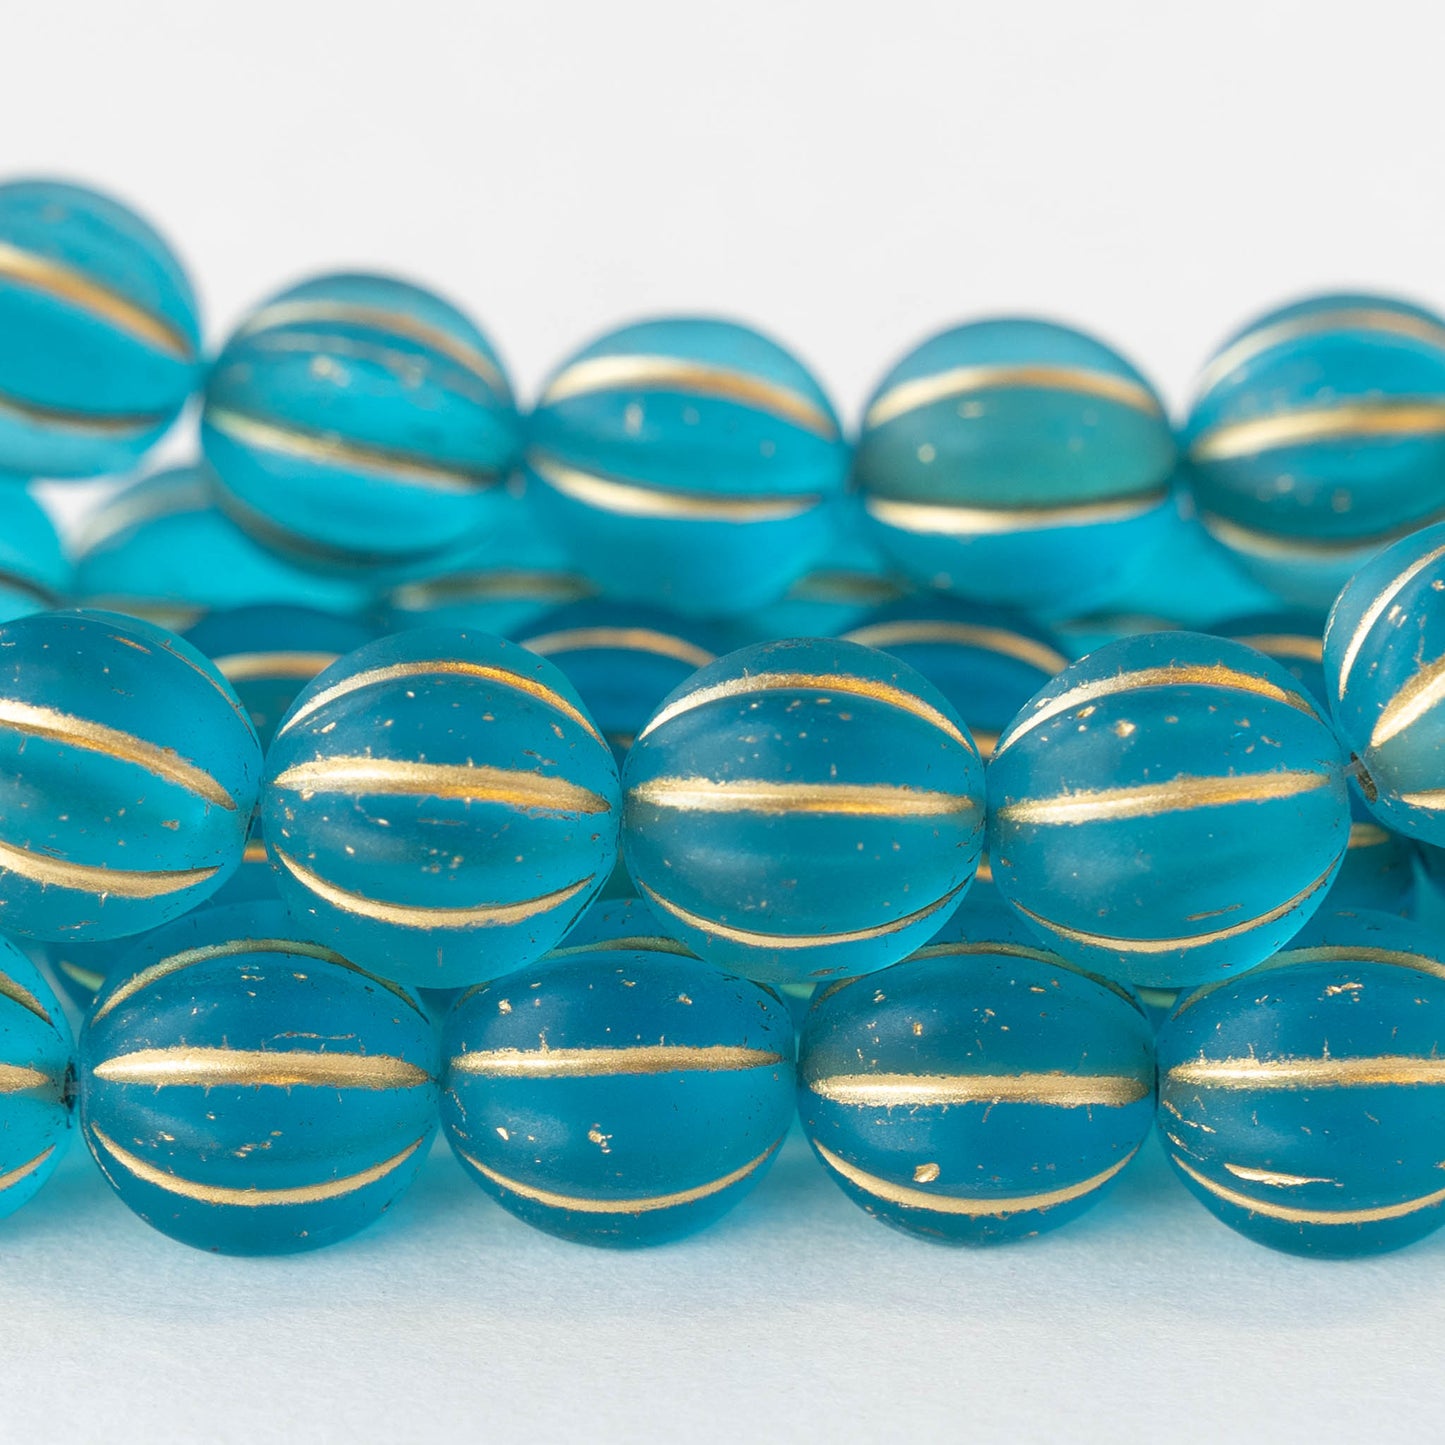 12mm Melon Beads - Matte Turquoise with Gold - 15